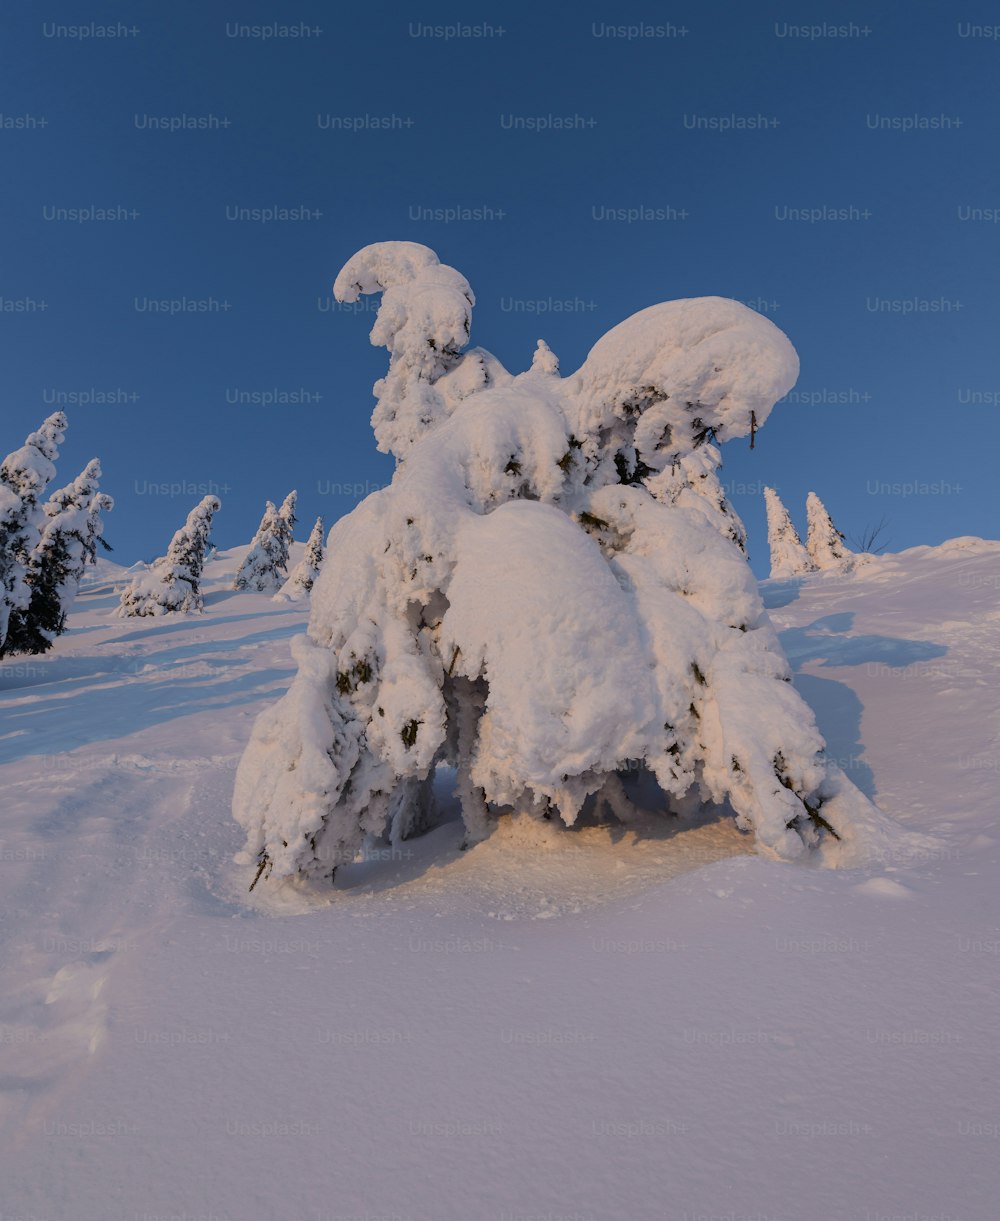 a large pile of snow sitting on top of a snow covered slope